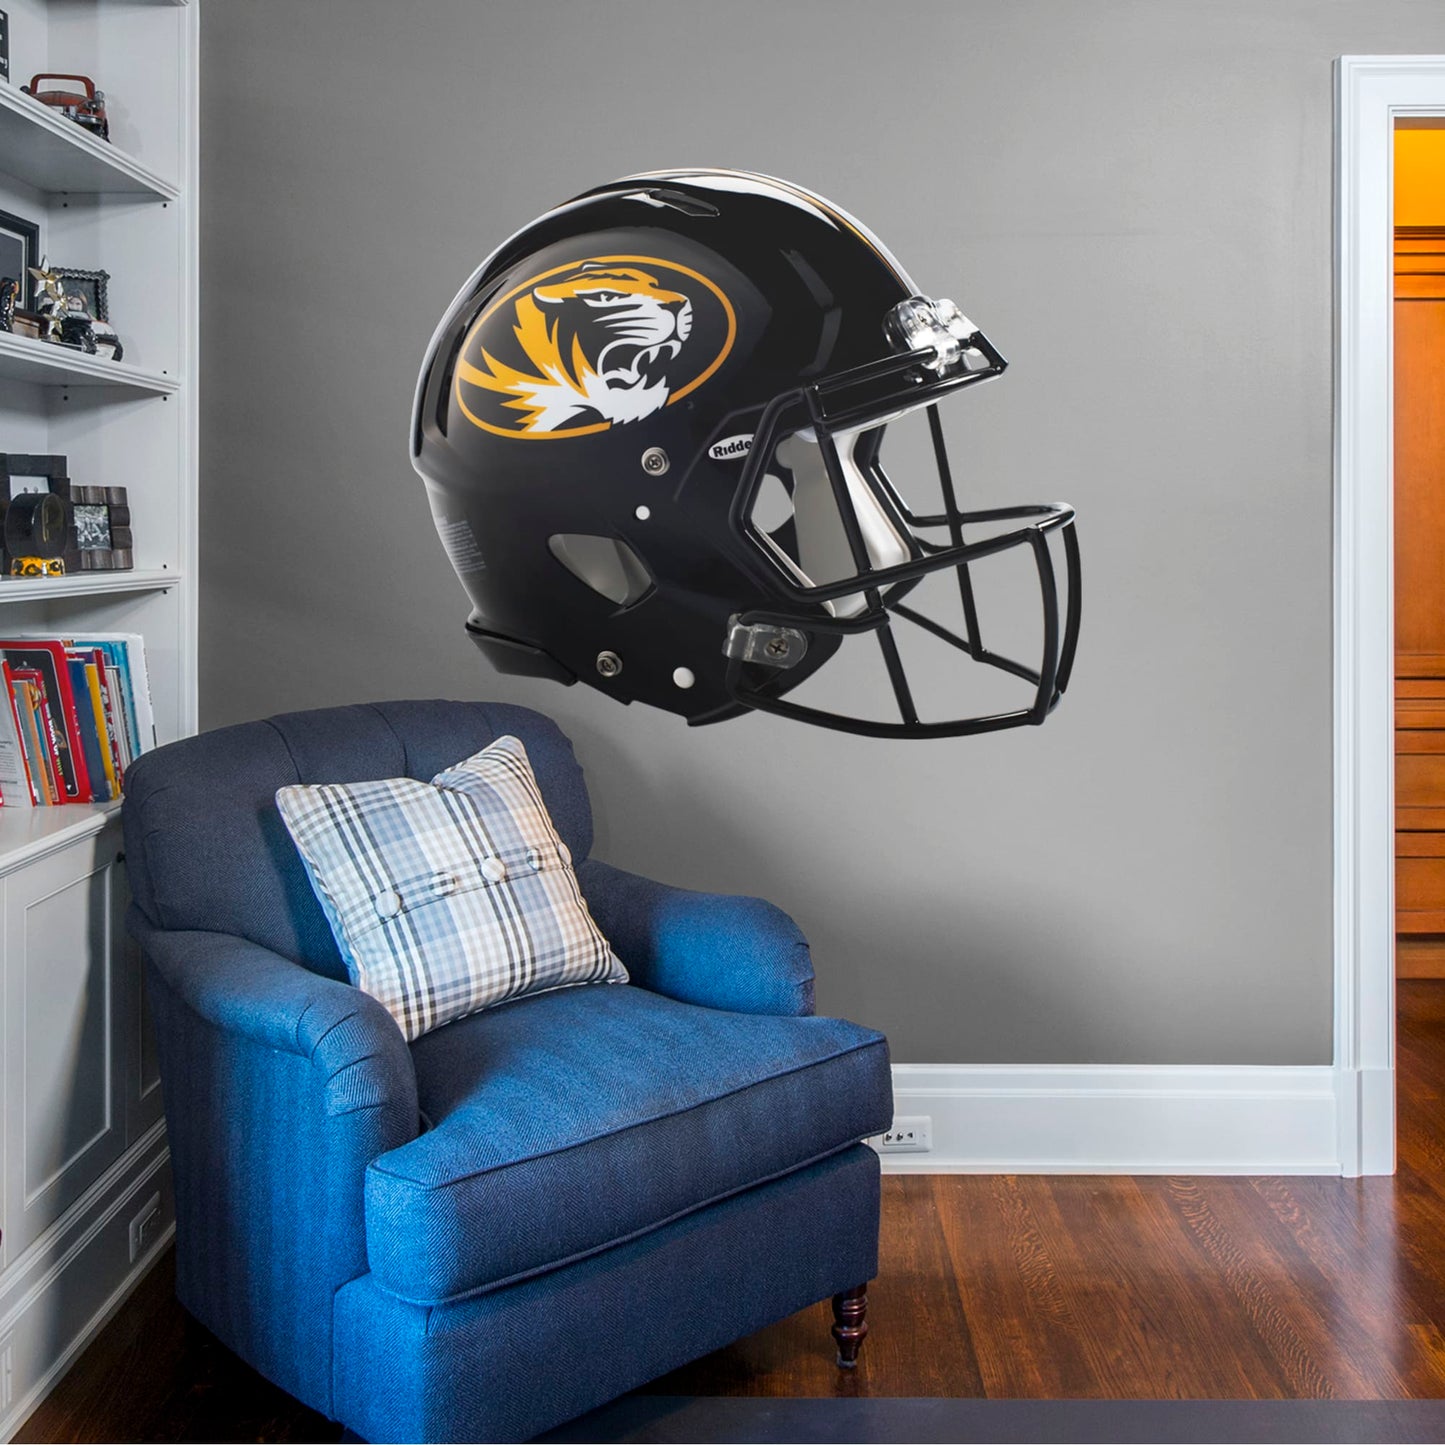 Missouri Tigers: Helmet - Officially Licensed Removable Wall Decal